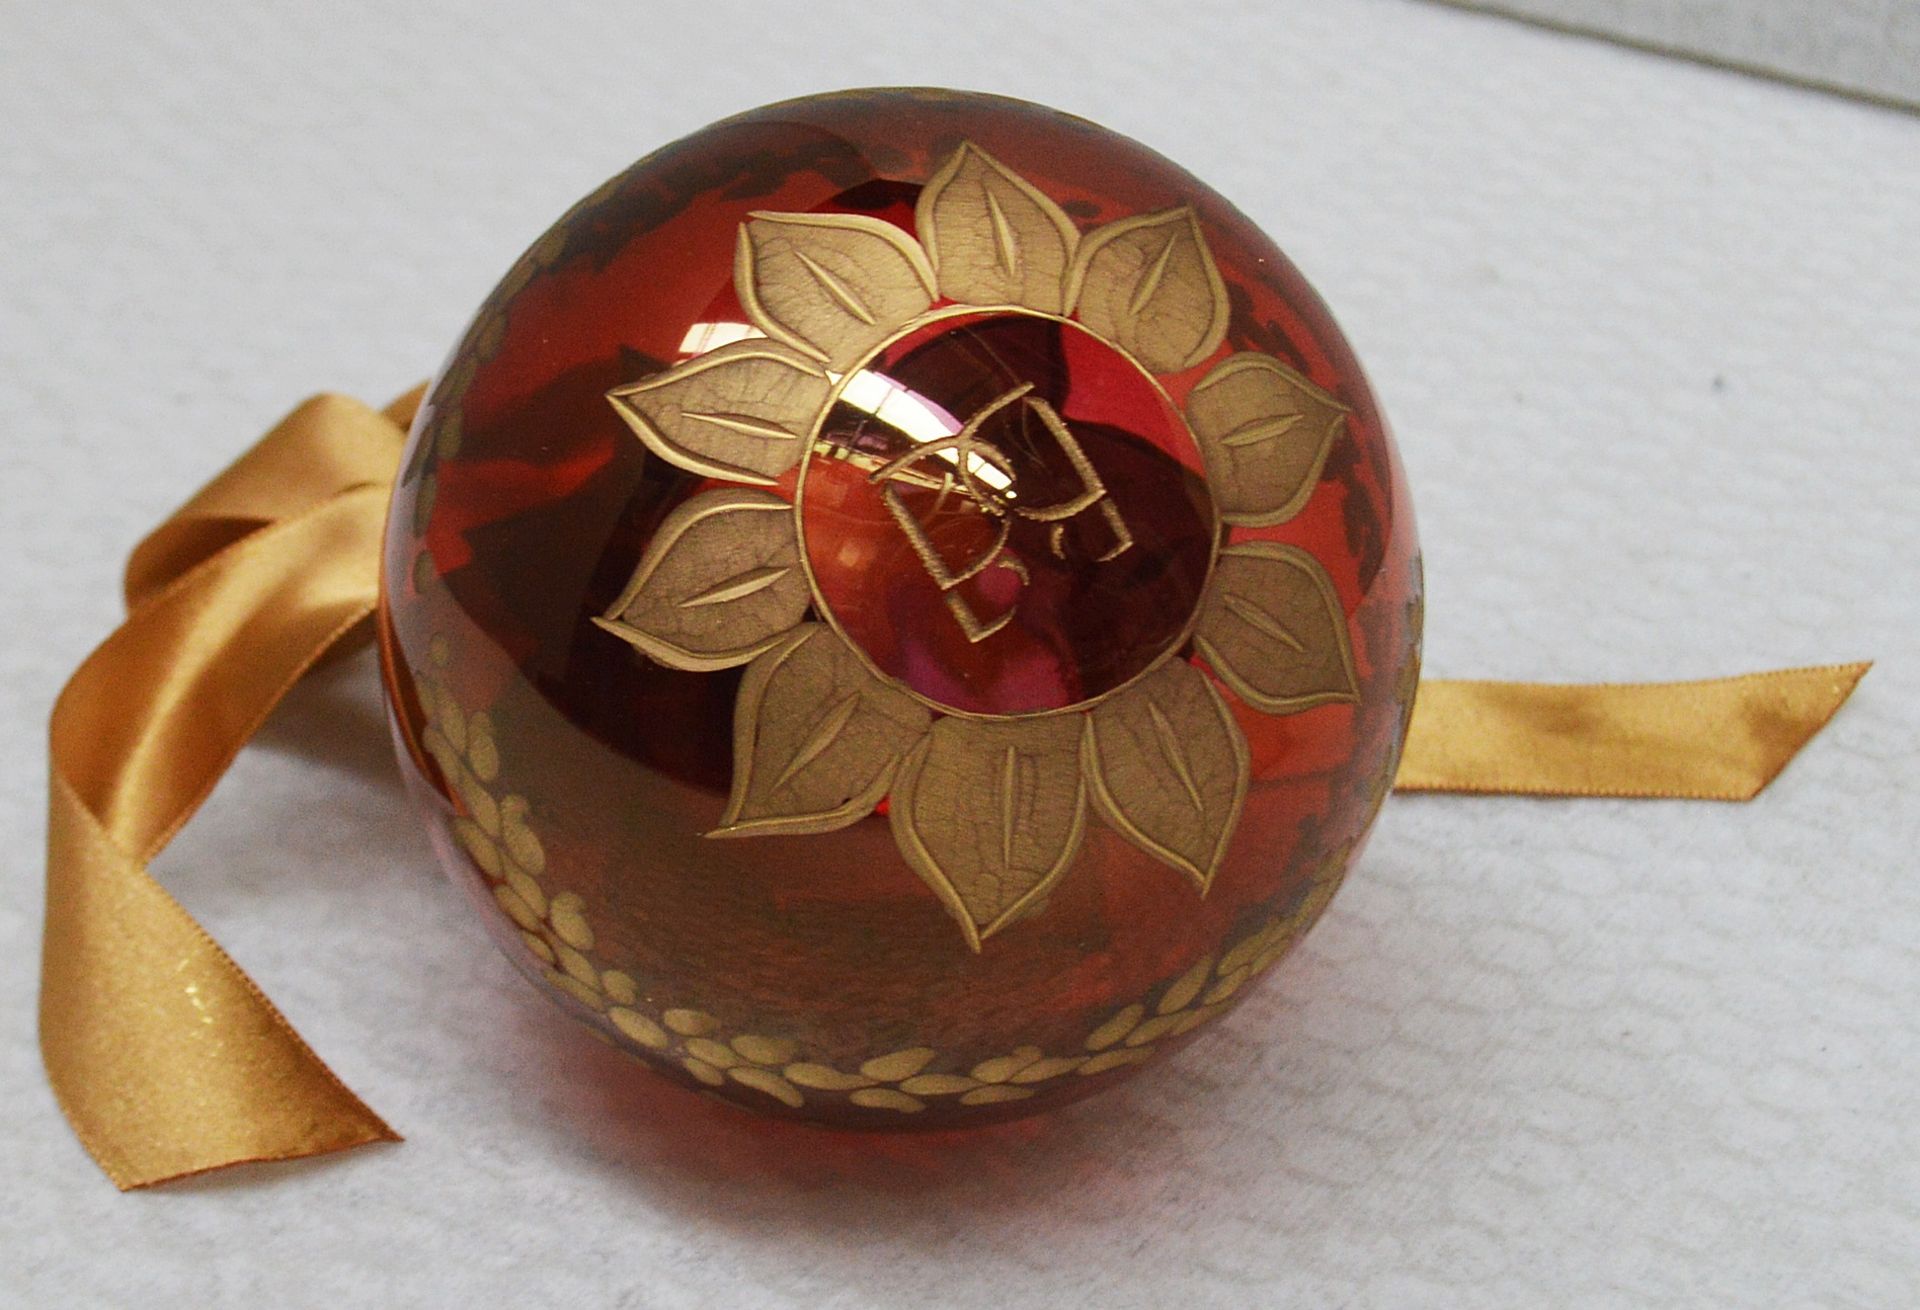 1 x BALDI 'Home Jewels' Italian Hand-crafted Artisan Christmas Tree Decoration In Red And Gold - - Image 4 of 5